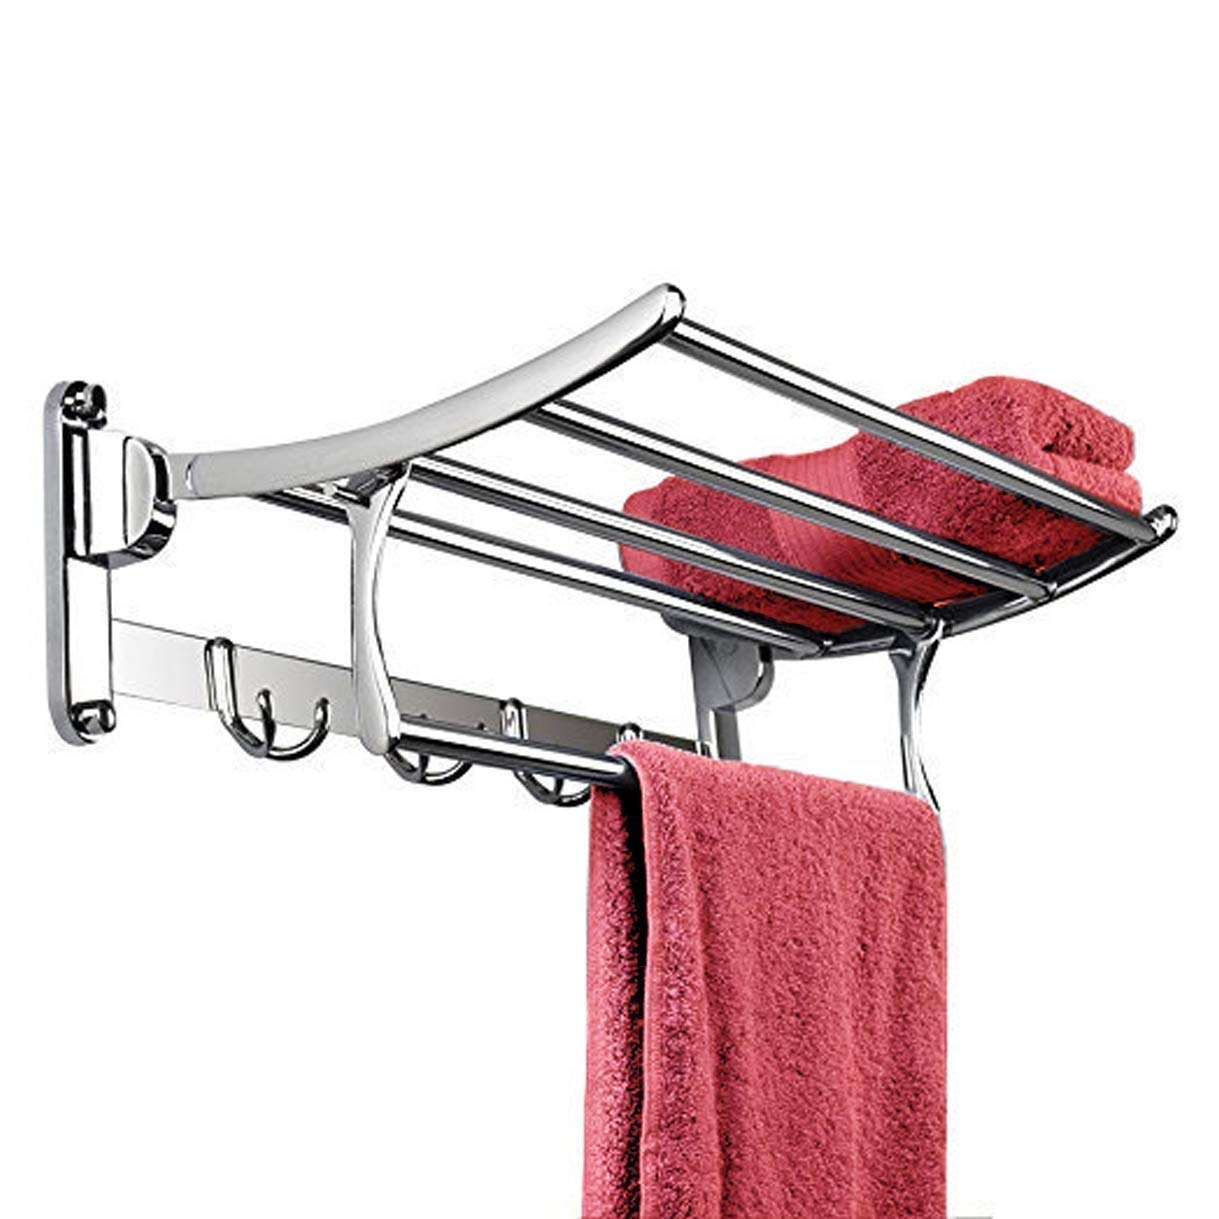 Quakin Gold Stainless Steel Folding Towel Rack (24 Inch-Chrome Finish)